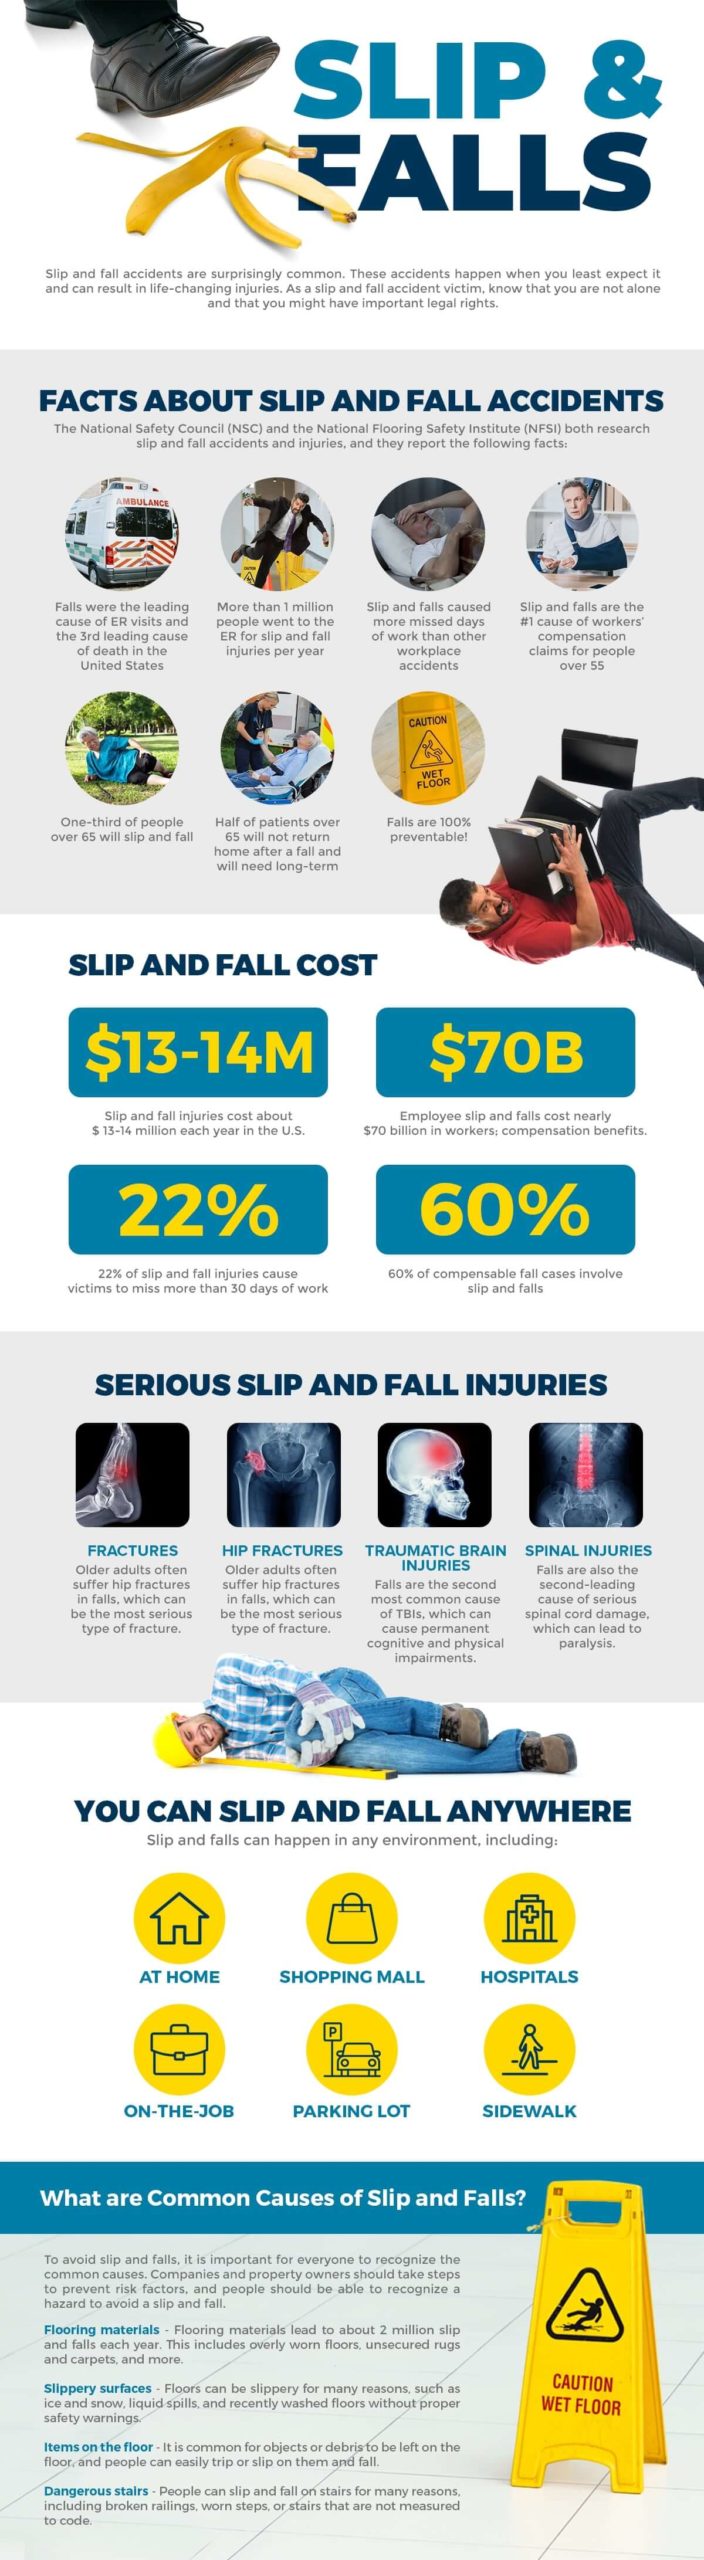 Slip and Fall, Trip and Fall - Personal Injury Law Firm Leonick Law